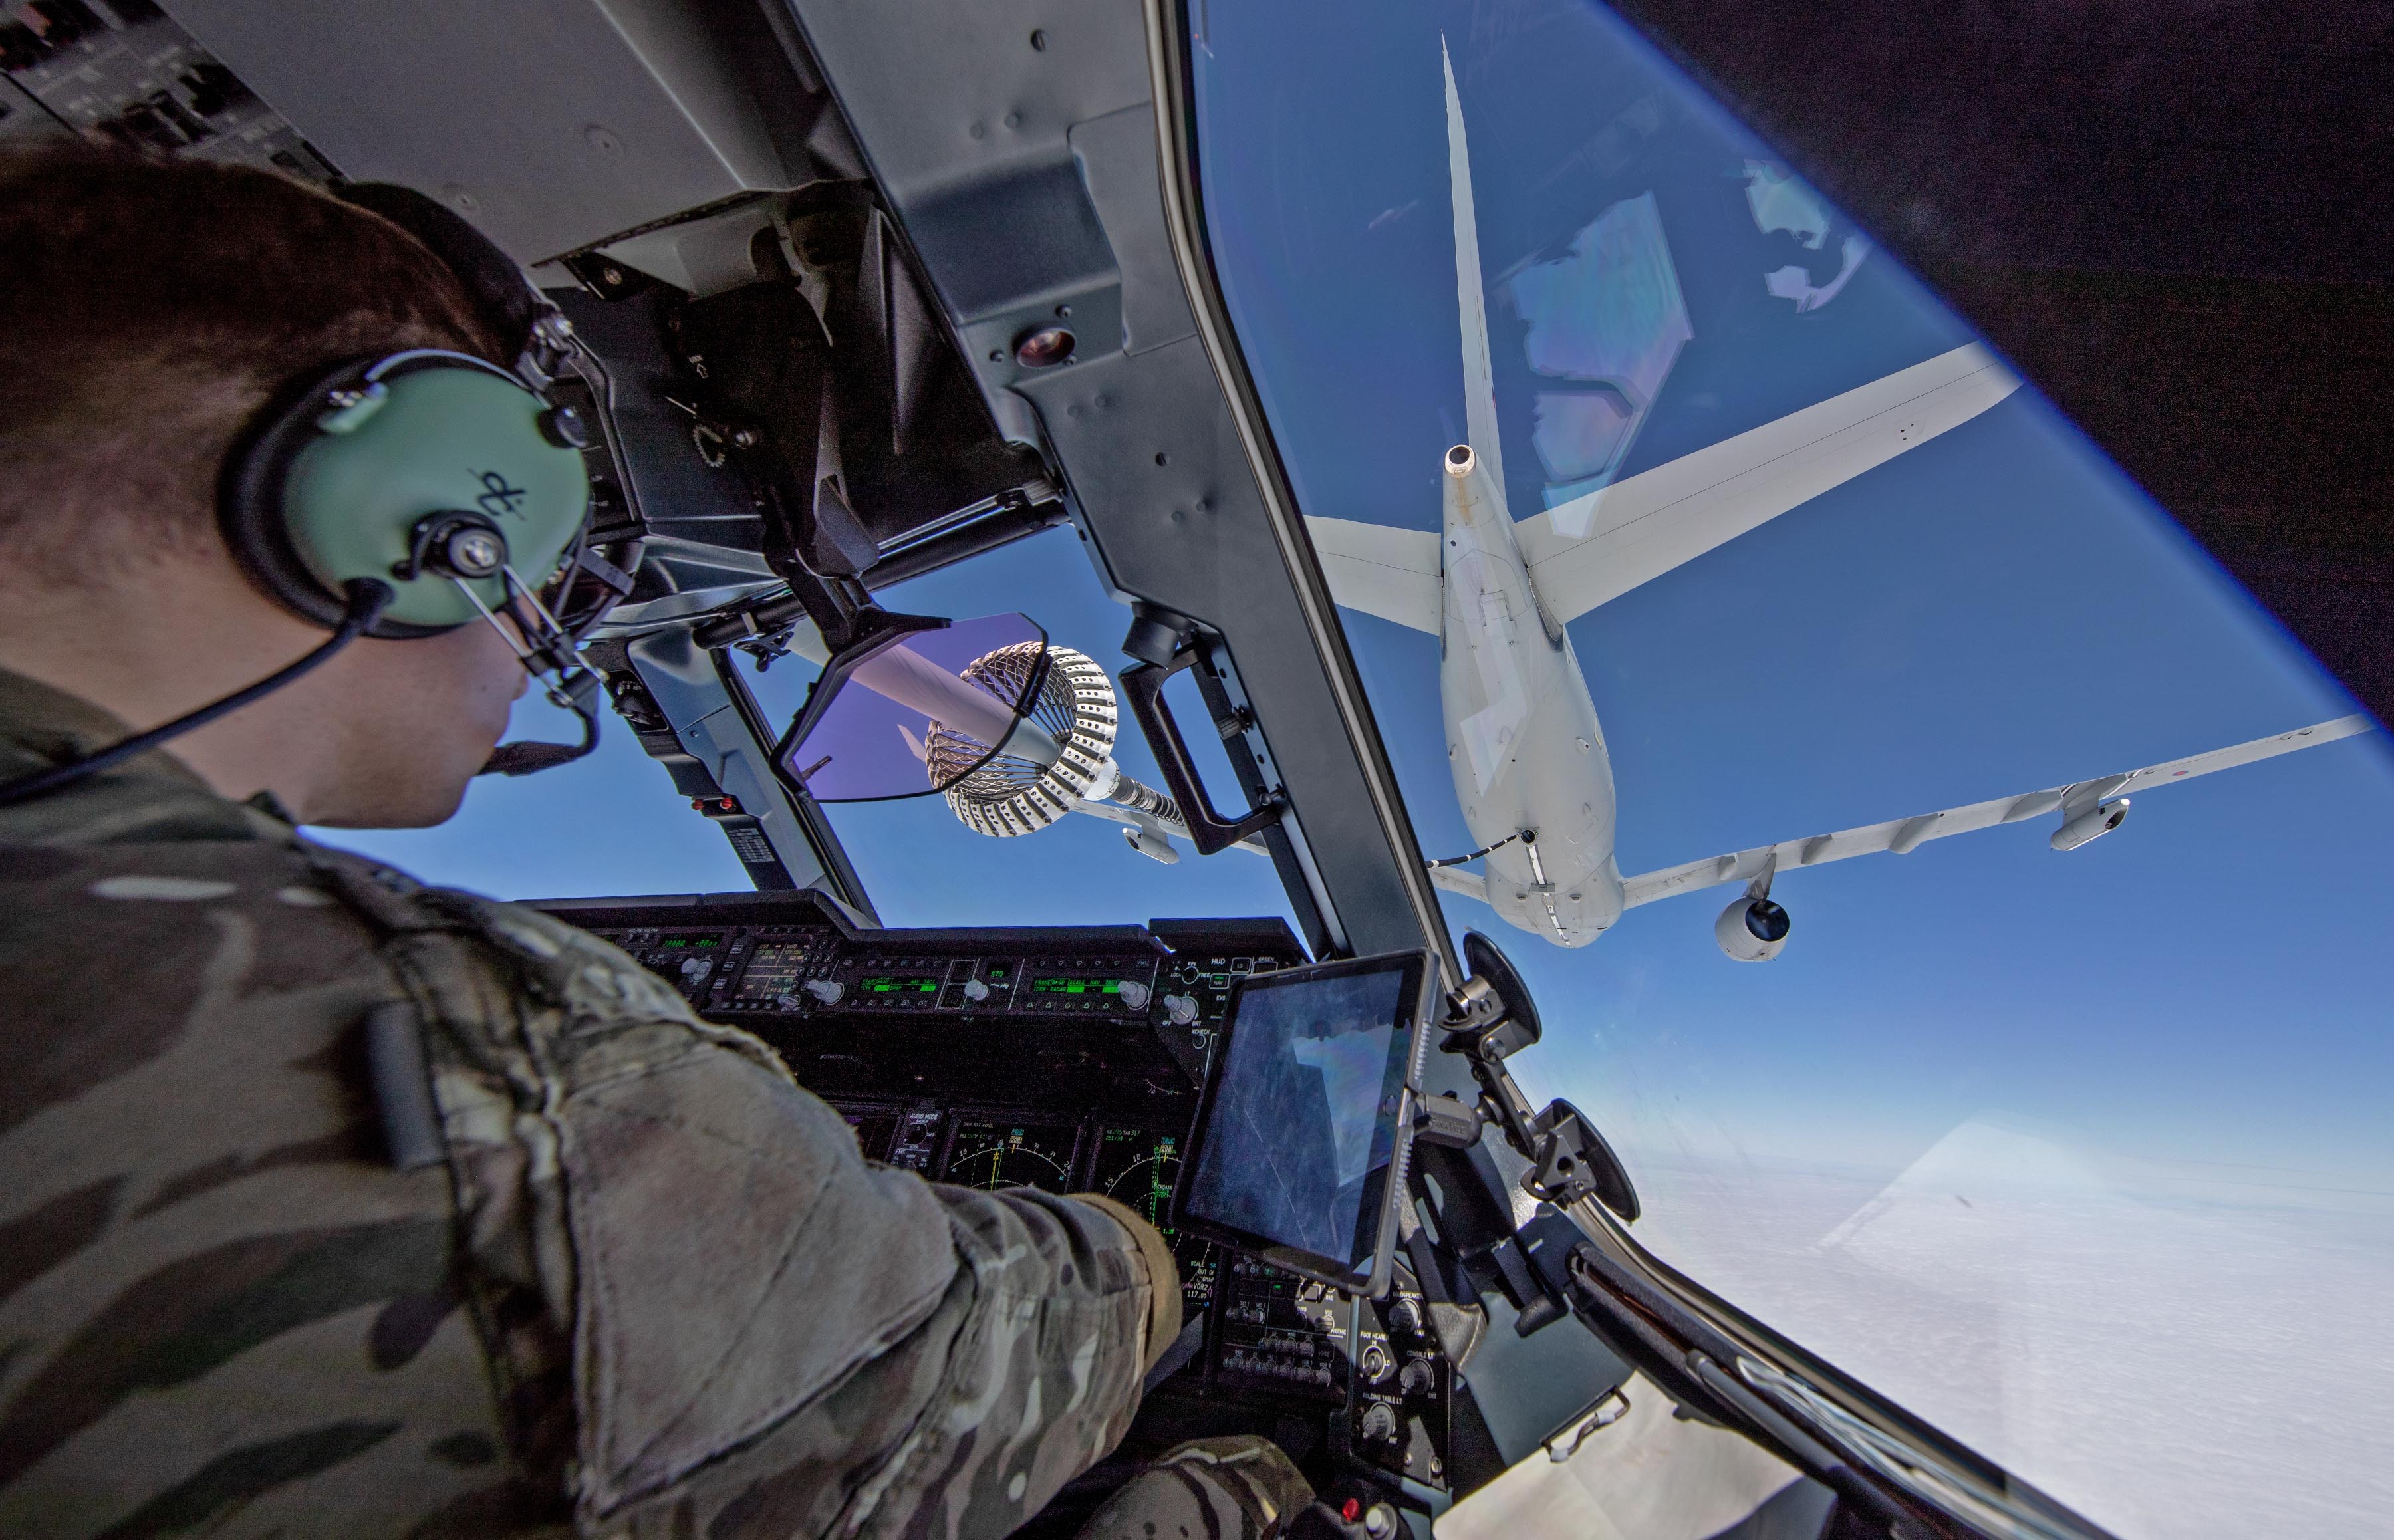 Image shows RAF pilot in the cockpit, while refuelling the carrier aircraft he is following.